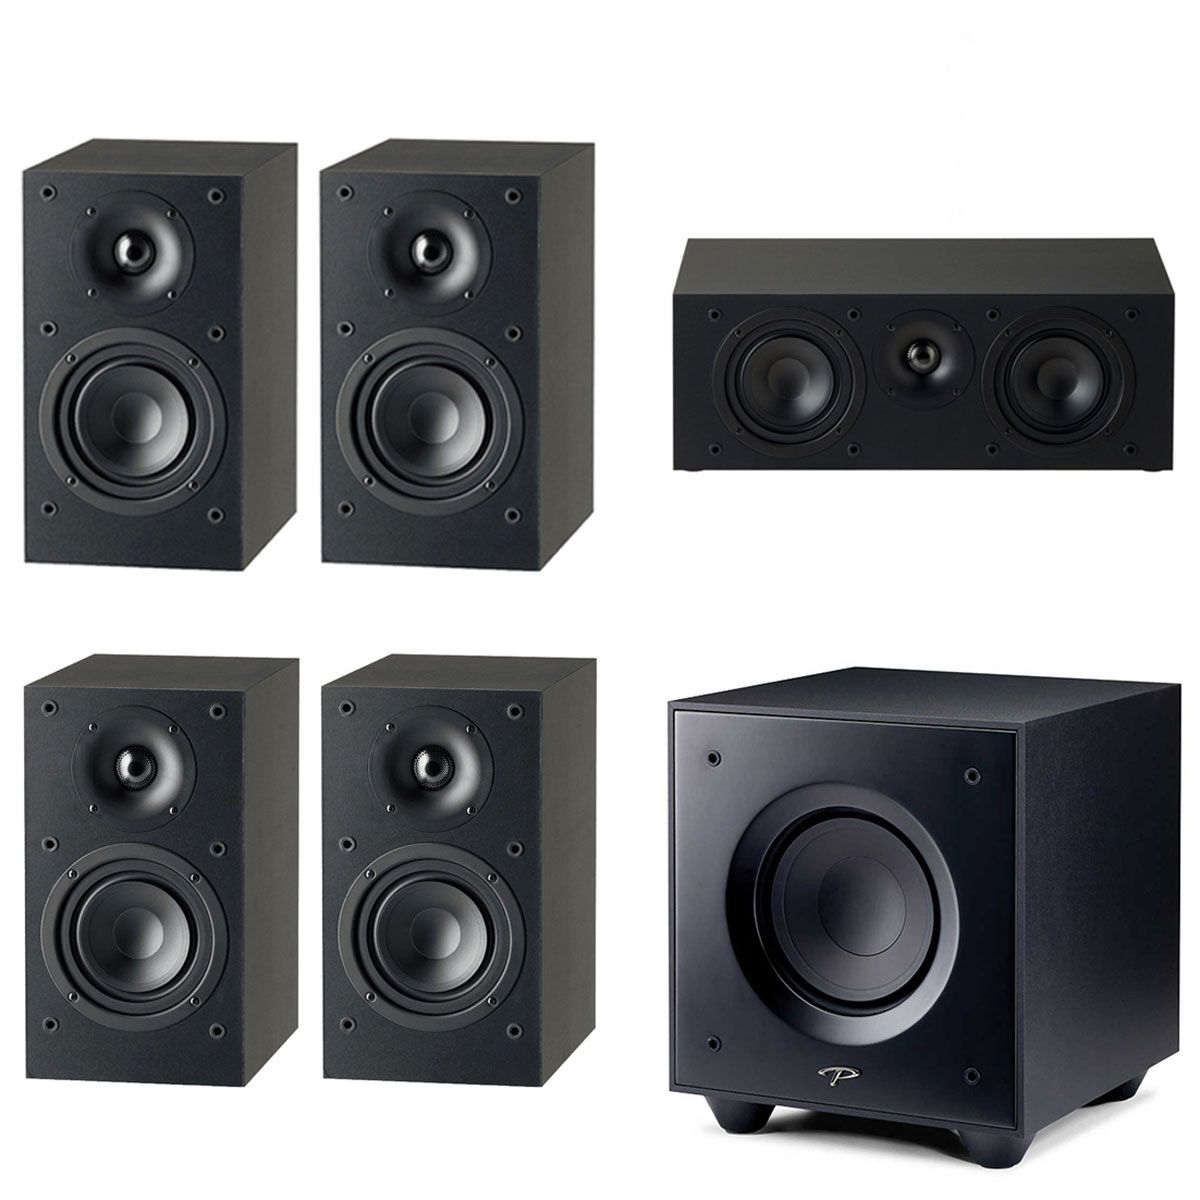 Paradigm 5.1 Surround Home Theater Package, Black